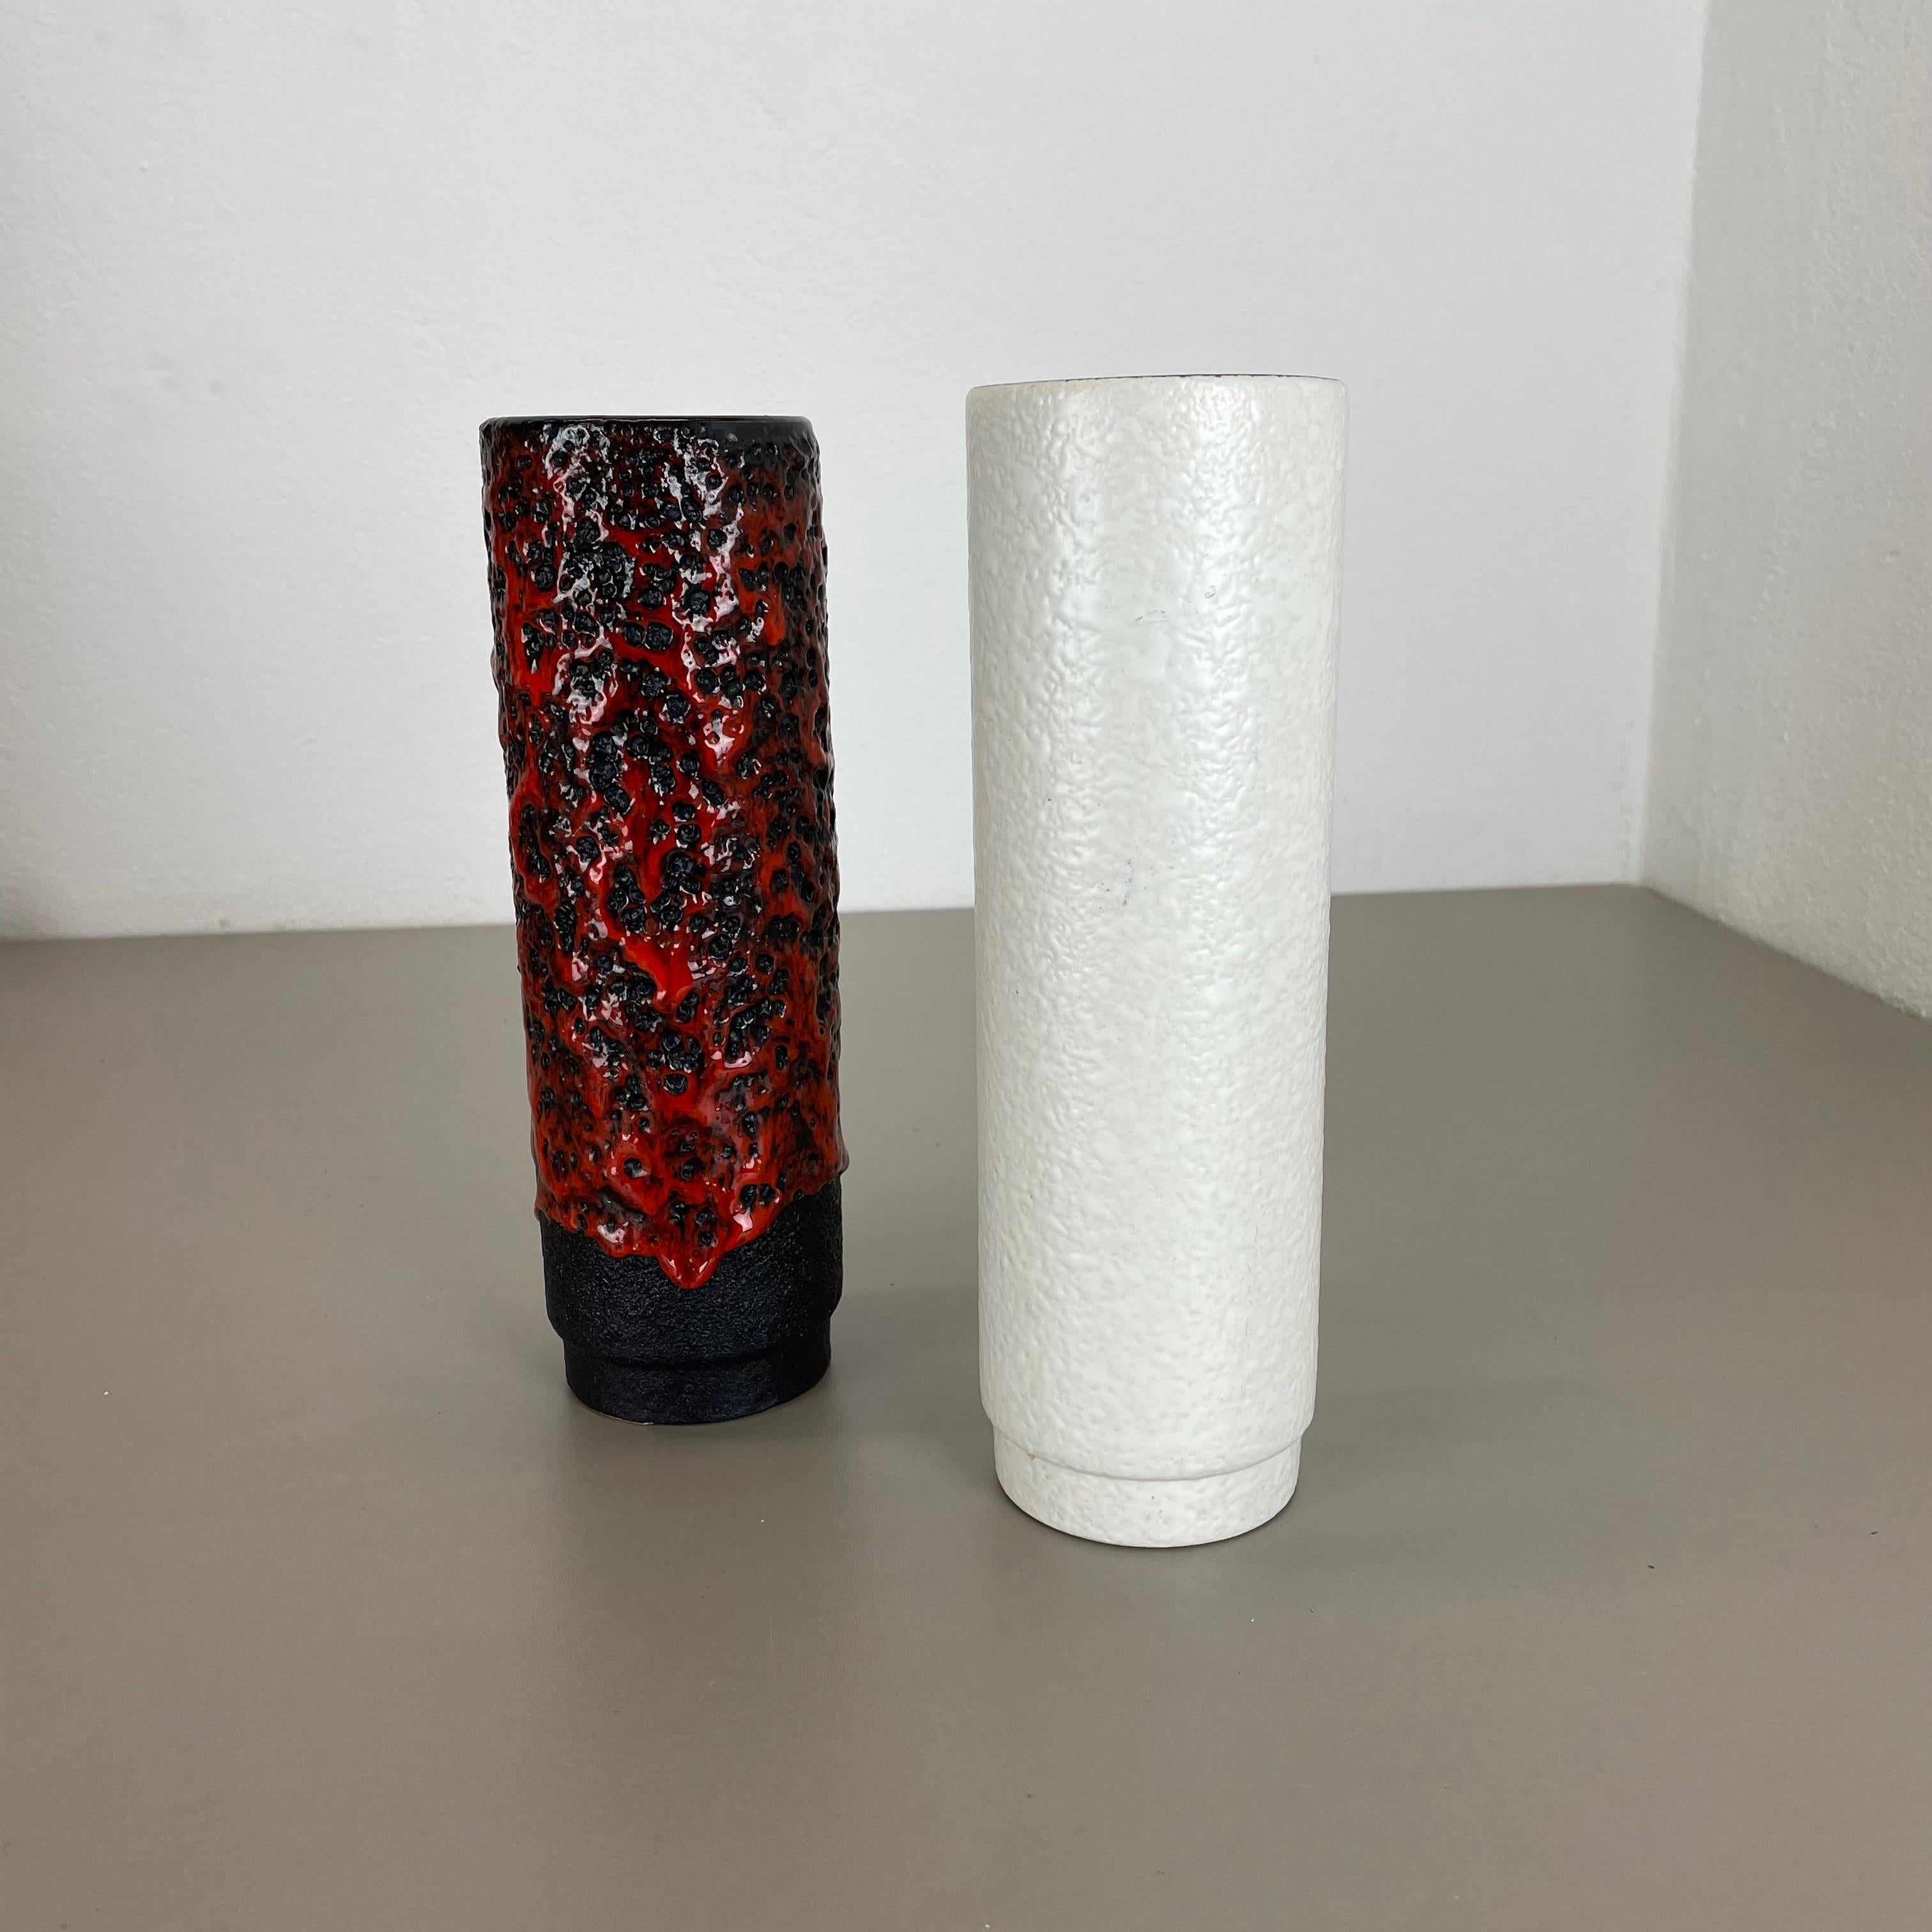 Article:

Set of two fat lava art vases




Producer:

Jopeko Ceramics, Germany



Decade:

1970s




These original vintage vases was produced in the 1970s in Germany. It is made of ceramic pottery in fat lava optic. Super rare